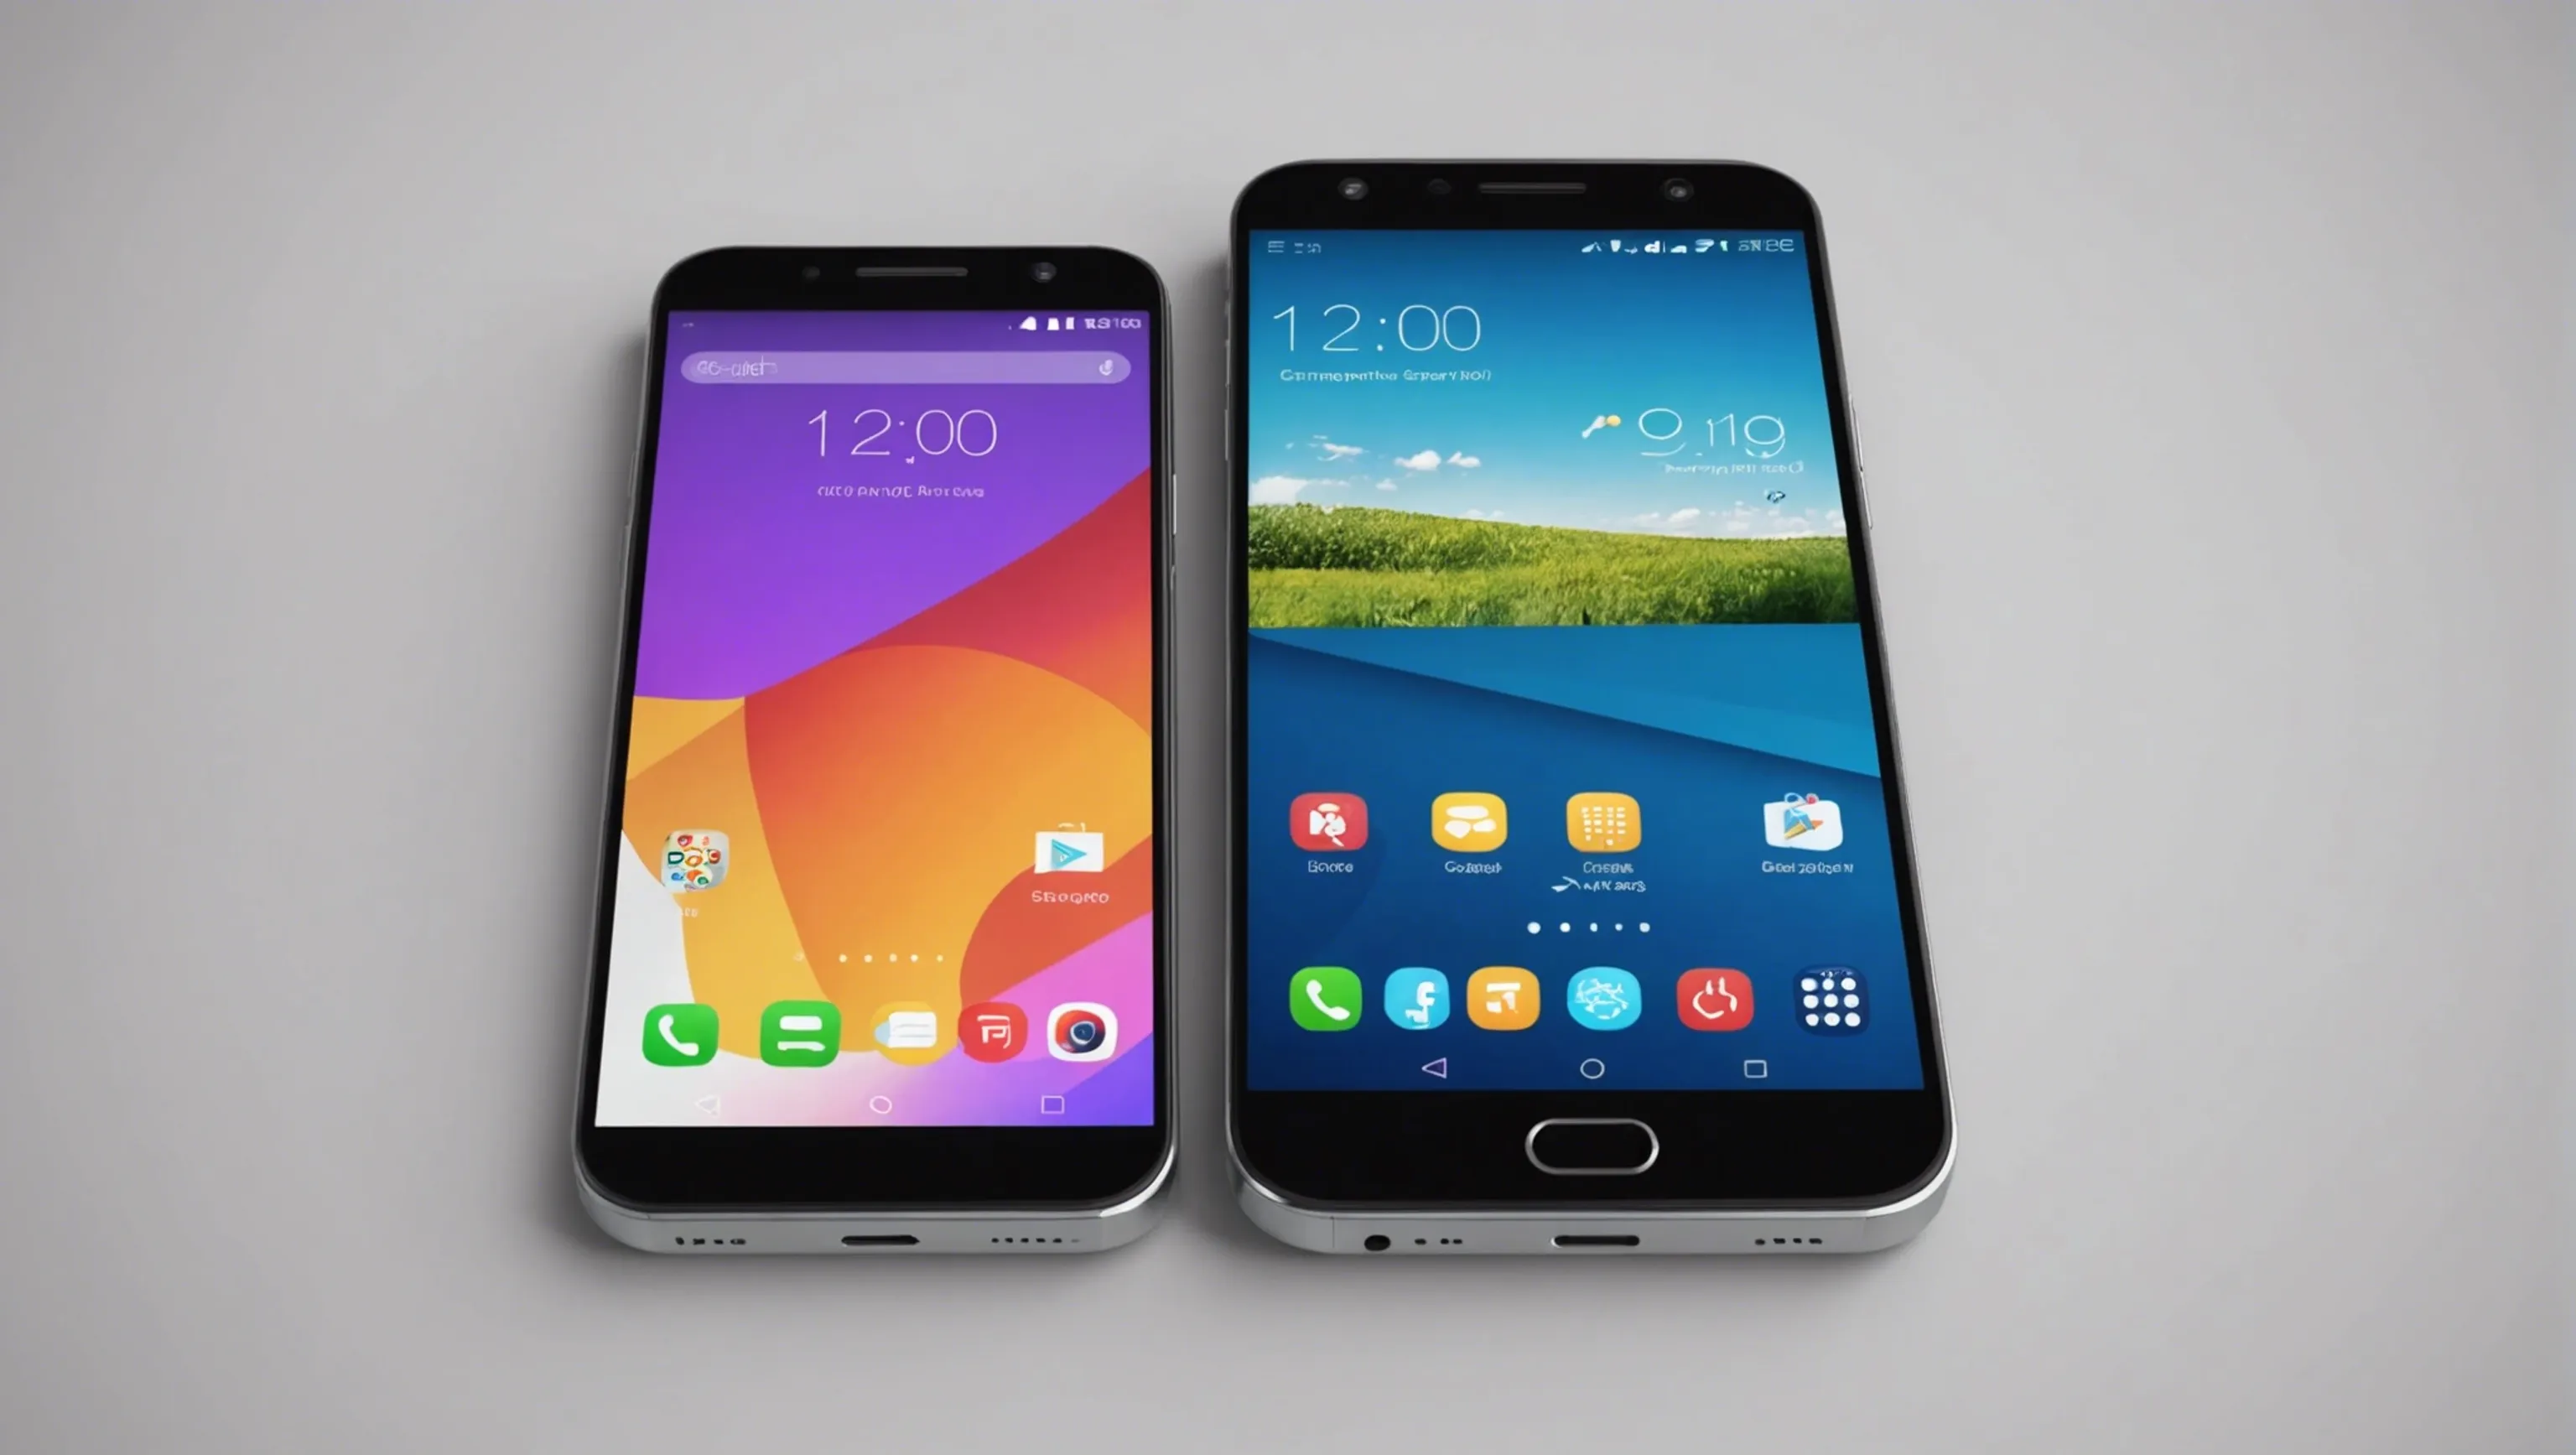 Smartphone comparisons for clients looking to buy high-tech